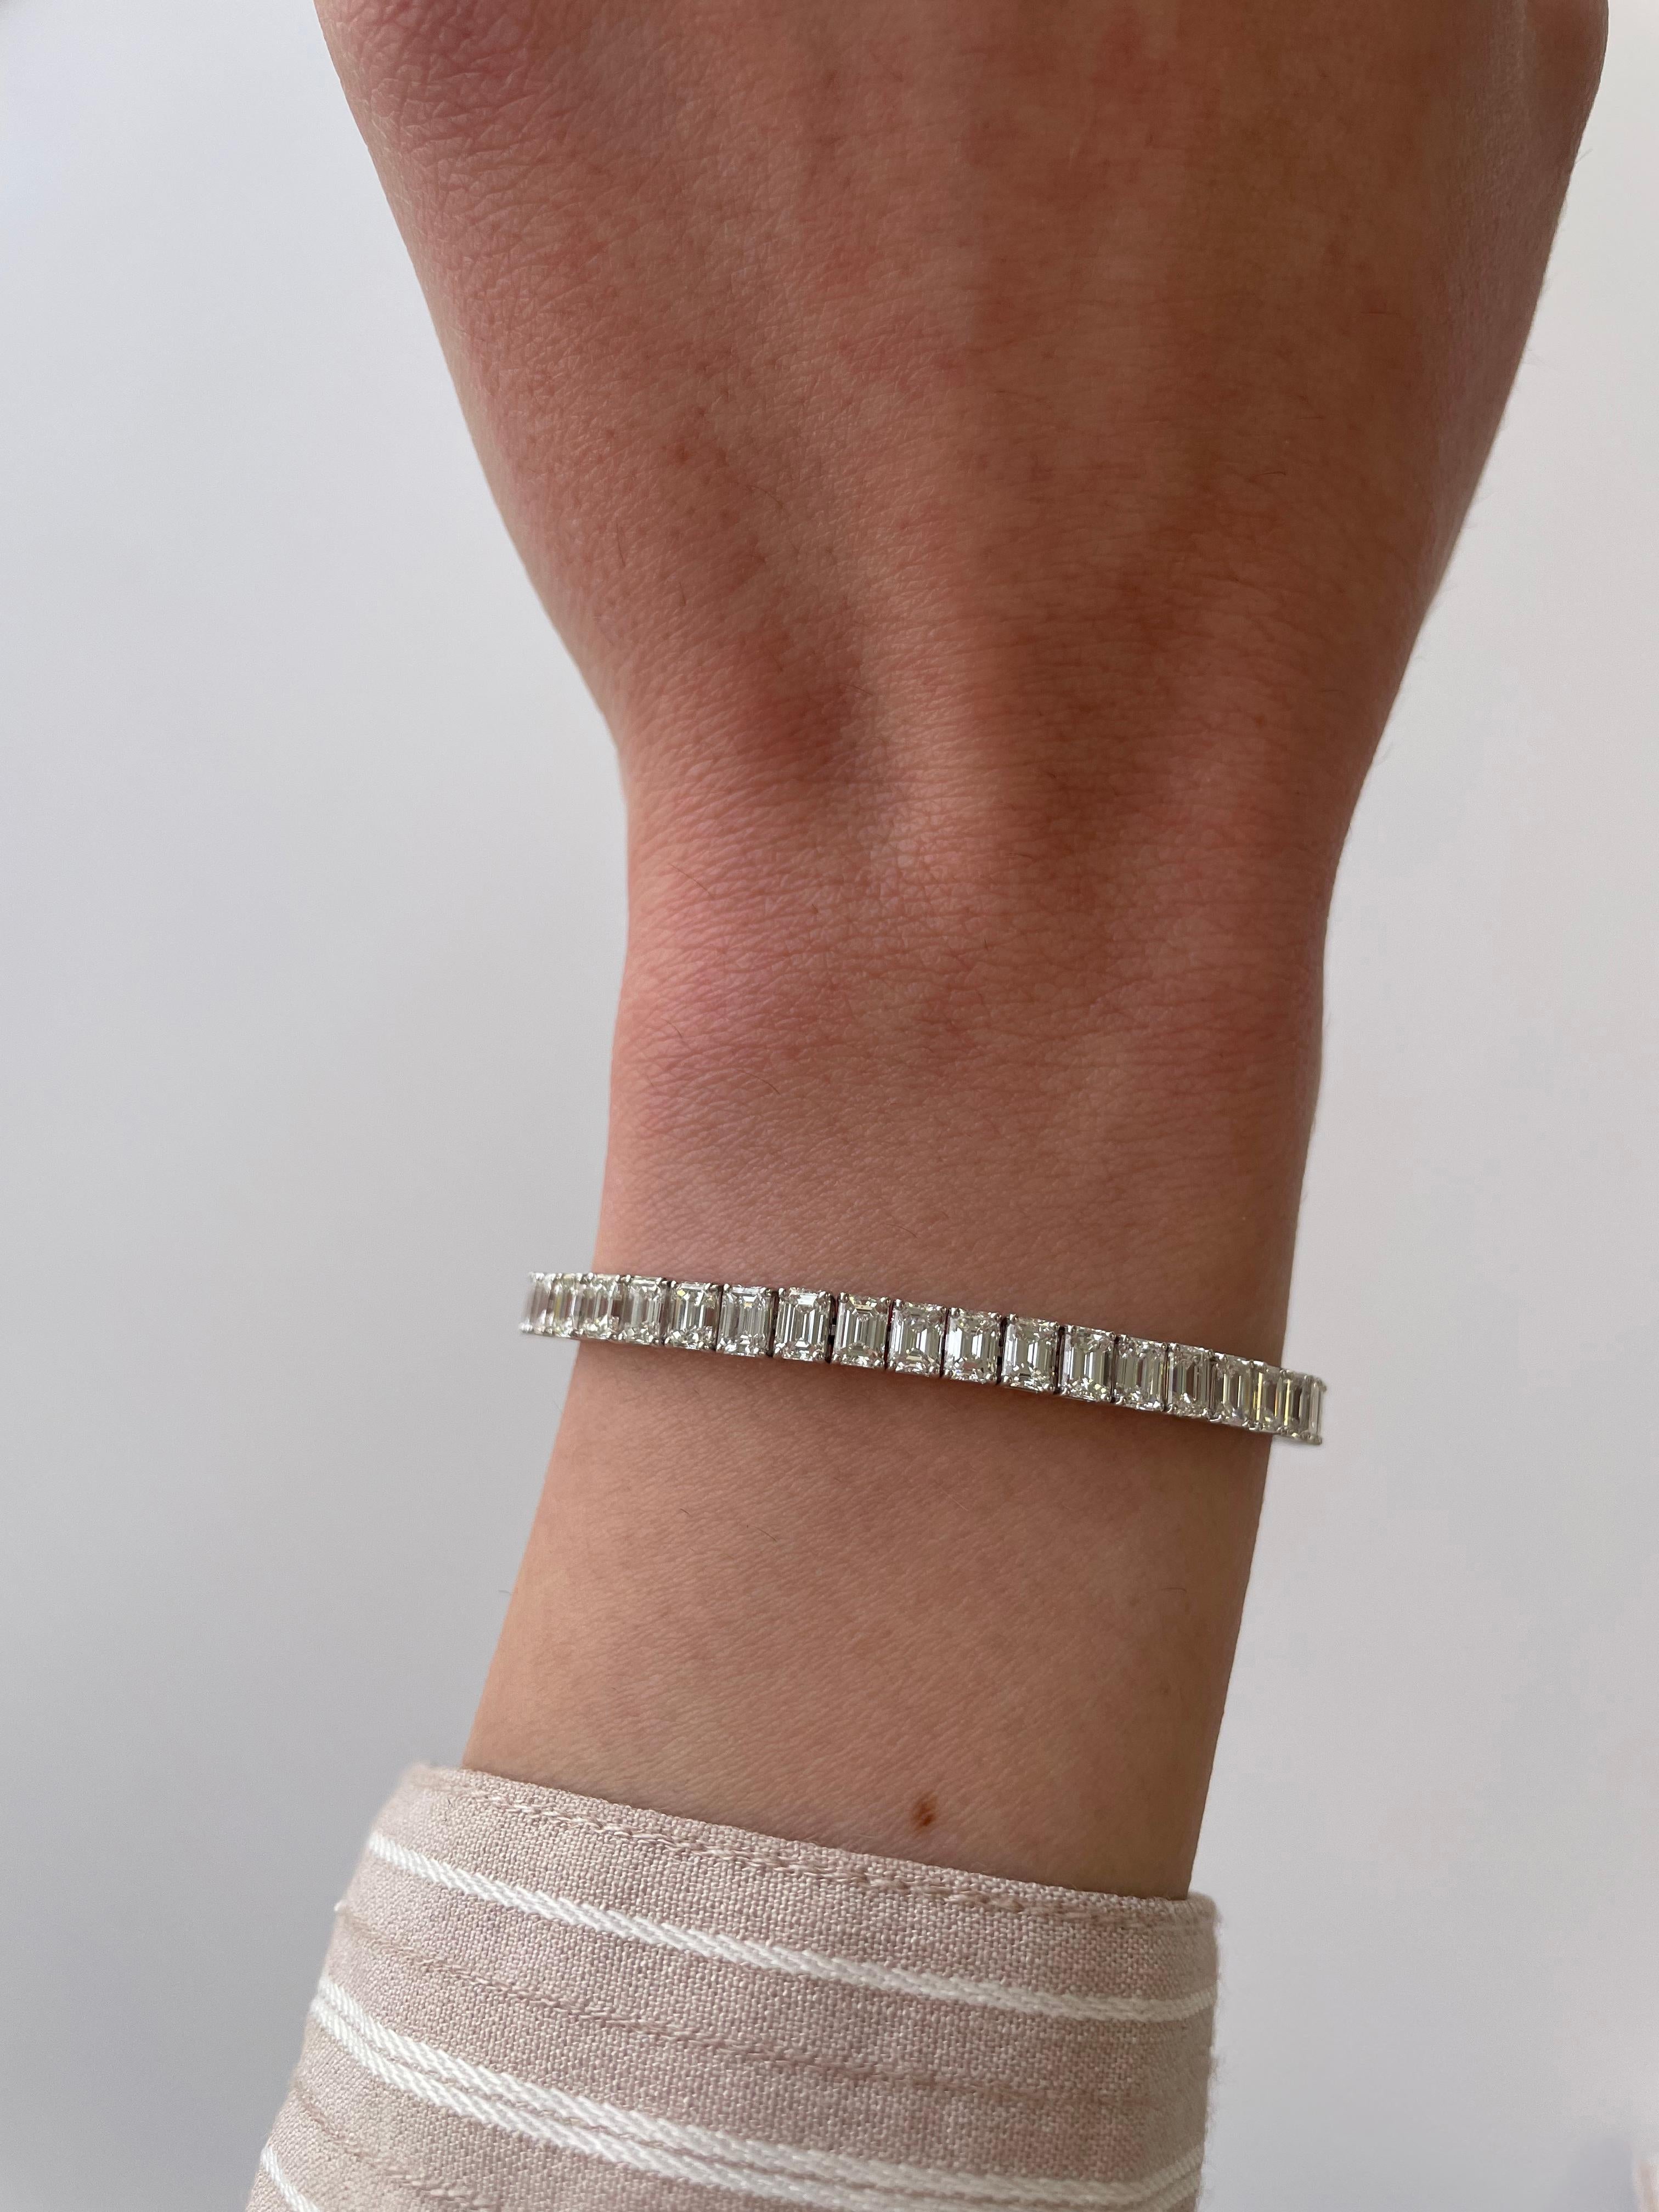 Stunning modern straight emerald cut diamond tennis bracelet. High jewelry by Alexander Beverly Hills.
54 emerald cut diamonds, 12.67 carats (apx 0.23ct each). Approximately F color and VS1 clarity. 18k white gold, 11.53 grams.
Accommodated with an